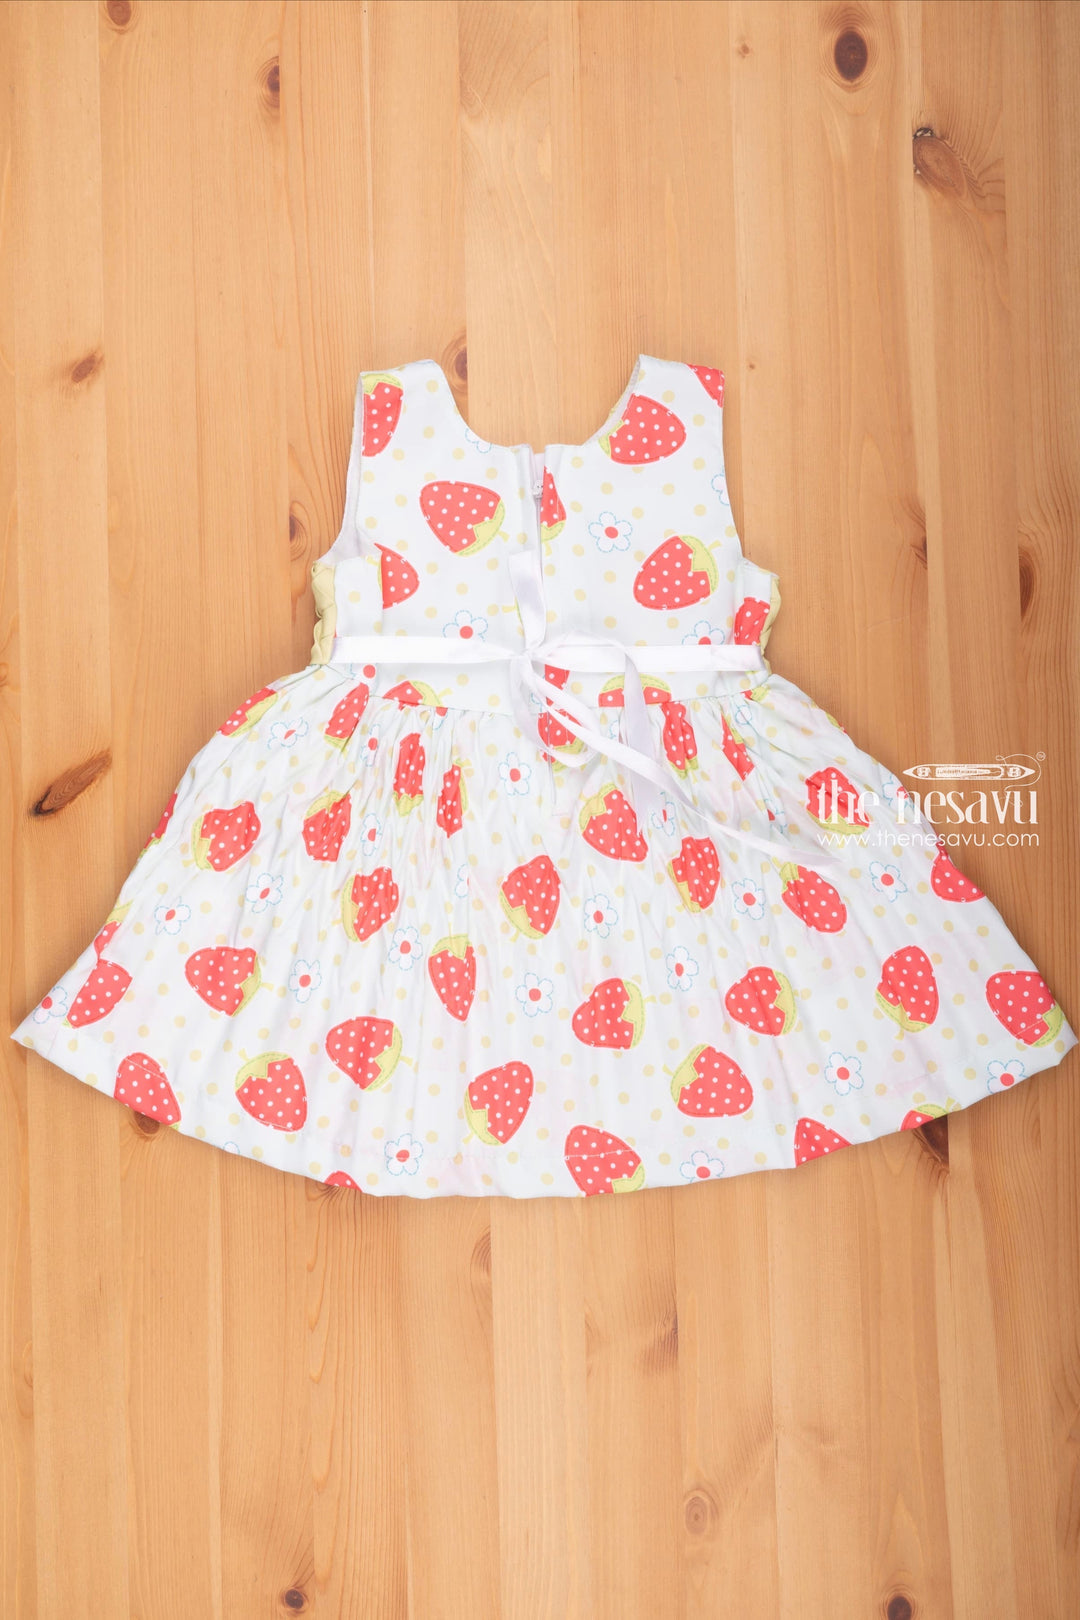 The Nesavu Baby Fancy Frock Green Delight: Strawberry Printed Cotton Frock for Baby Girls Nesavu Best Newborn Outfits | Printed Baby Girls Cotton Frock | the Nesavu